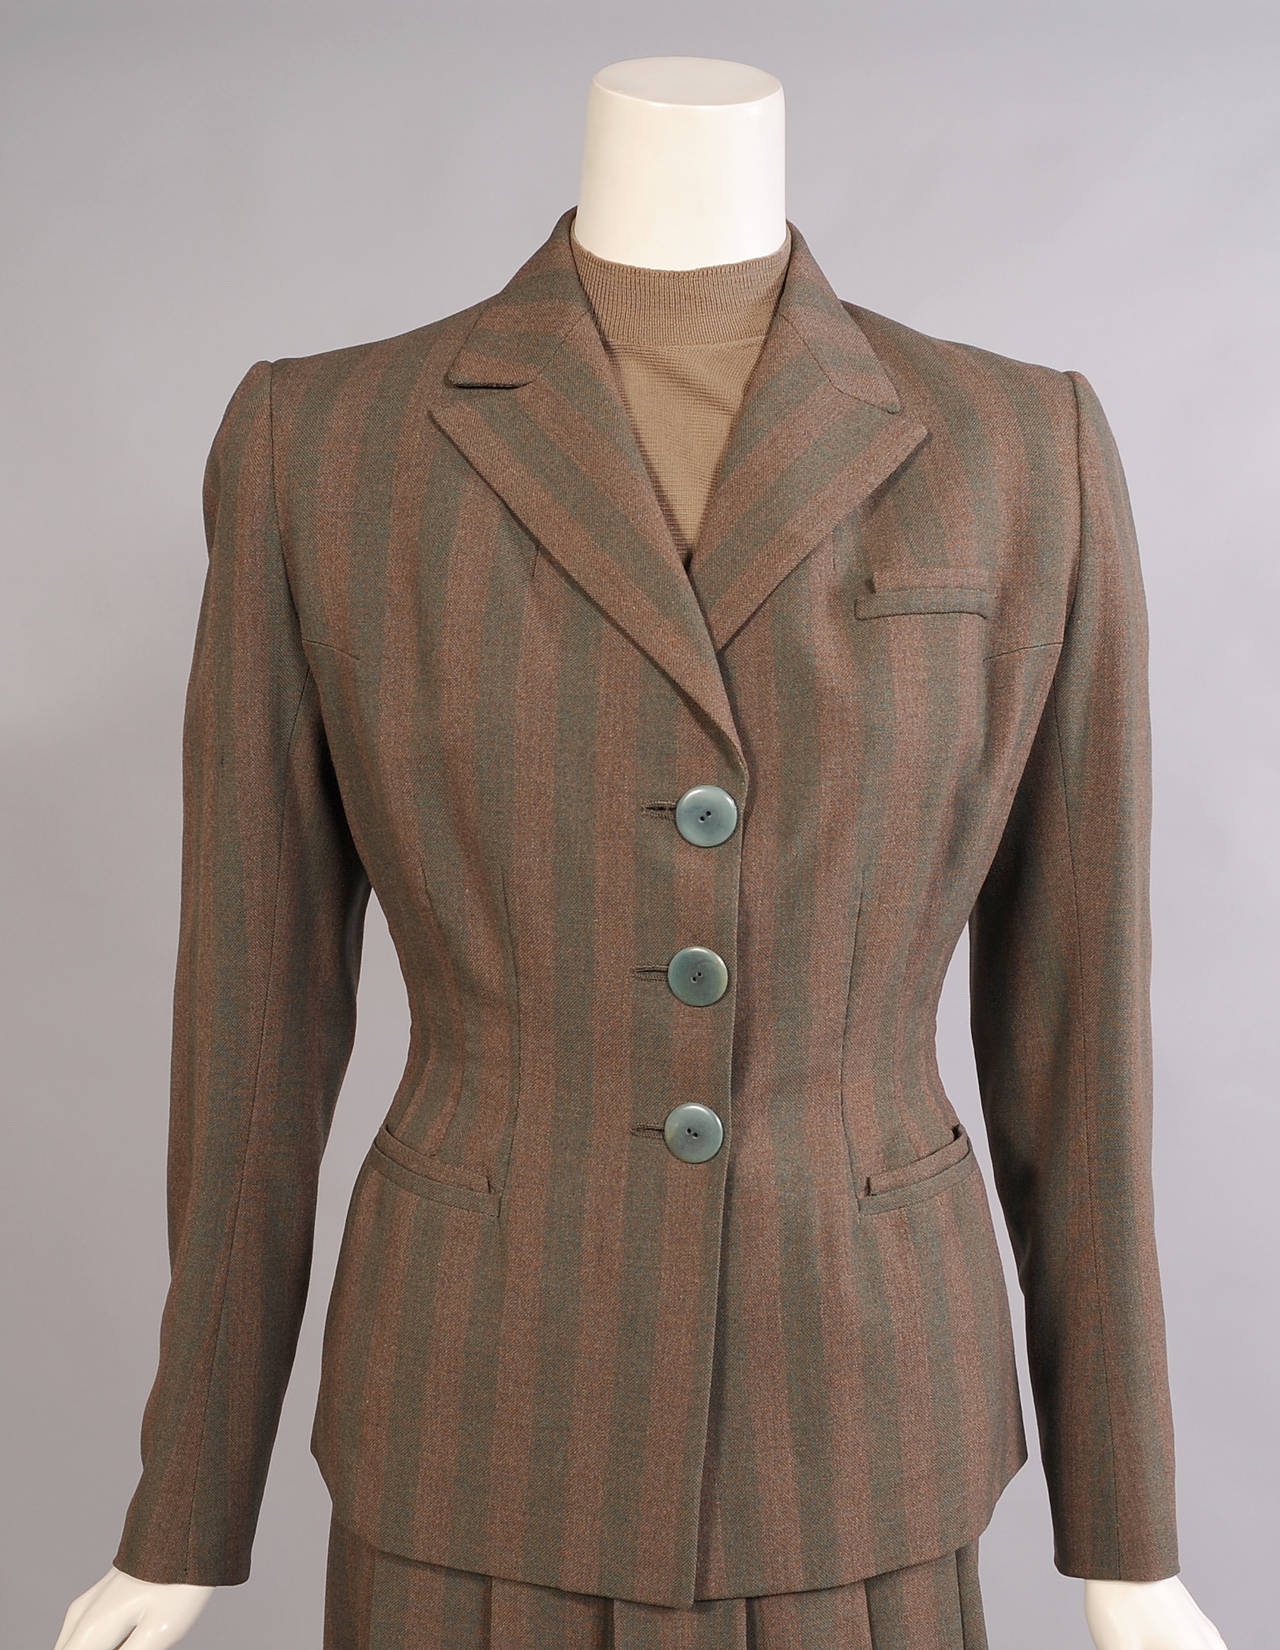 A rare and elegant example from the 1940's this Hermes striped wool suit has a classic blazer with a nipped in waist, a two tone sweater, and a long skirt with a pleated front. The jacket and skirt are made form a subtle green and brown striped